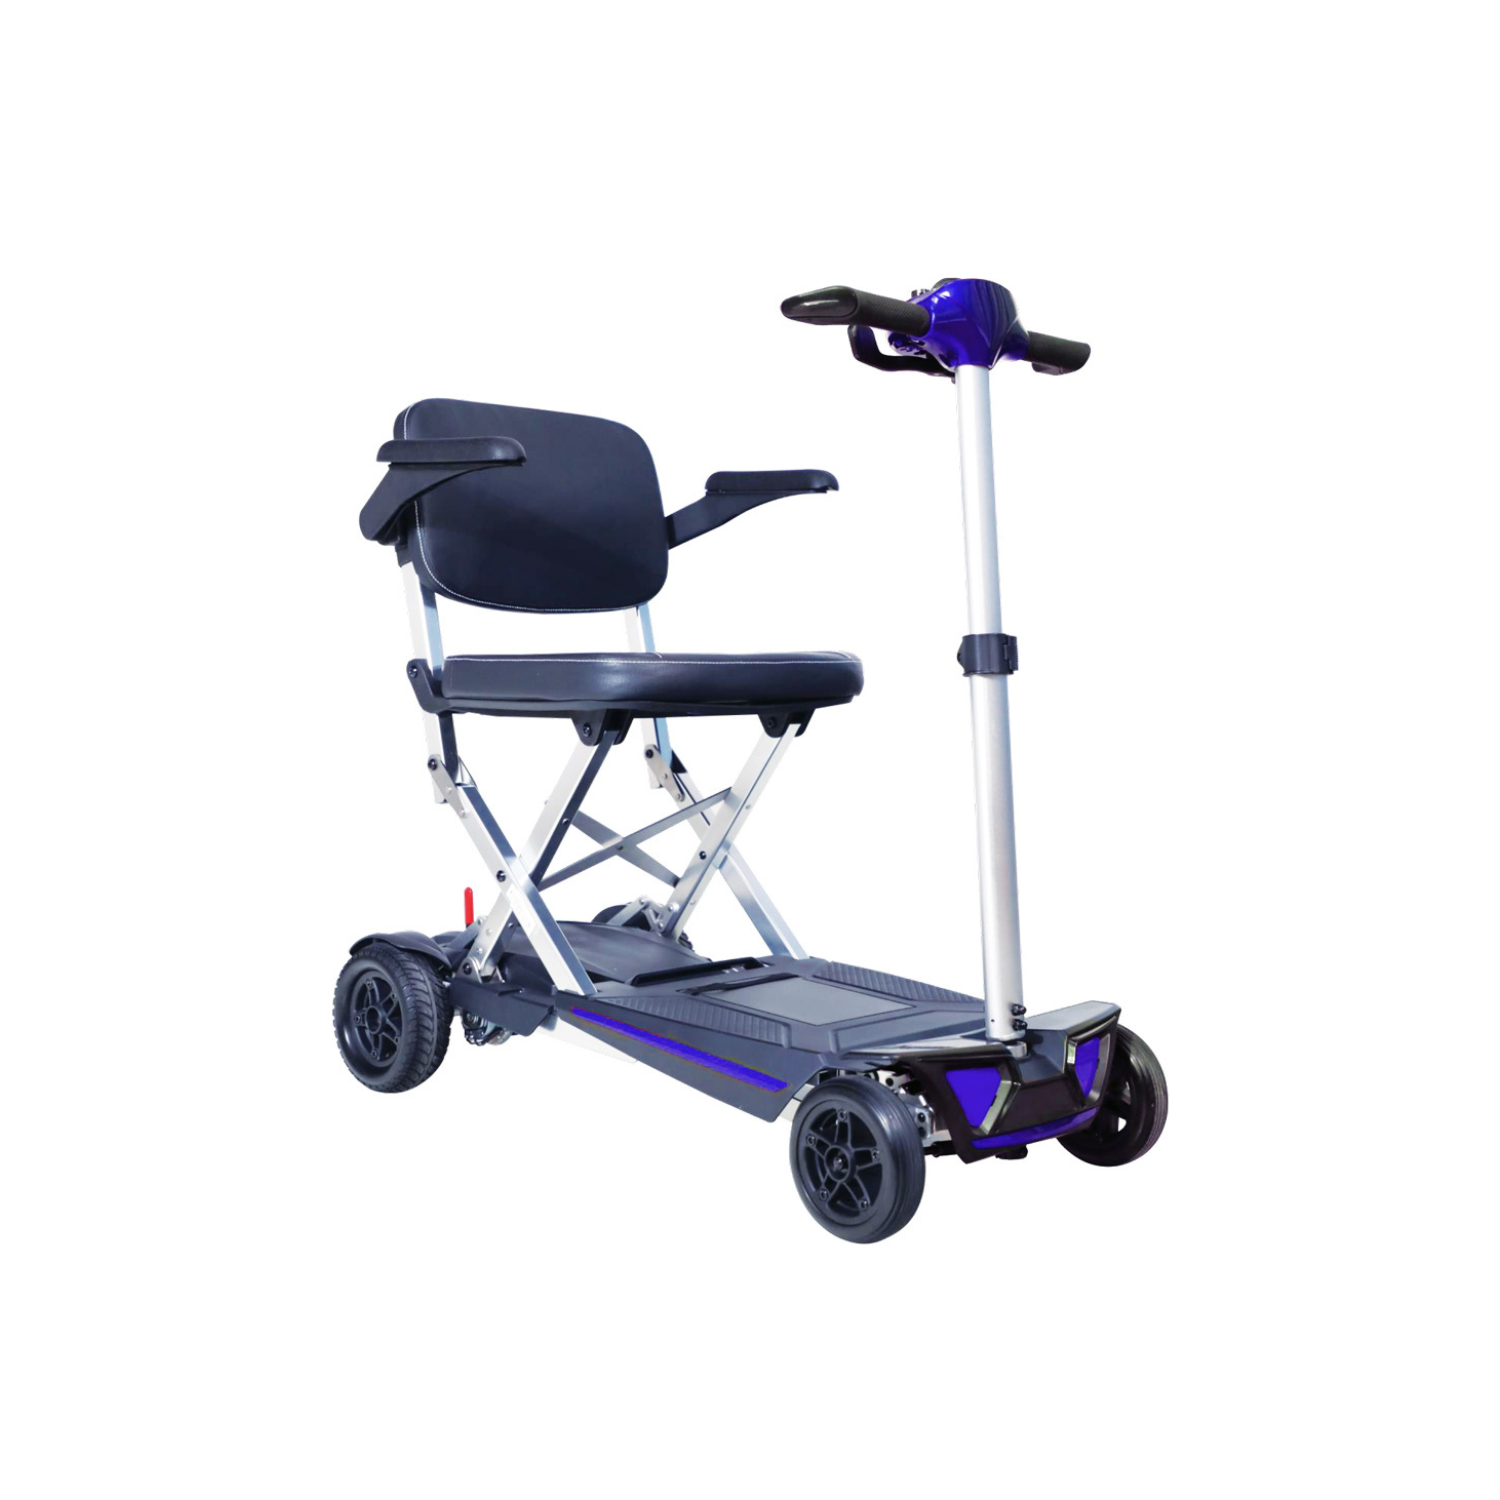 Solax MobiFire Folding Mobility Scooter